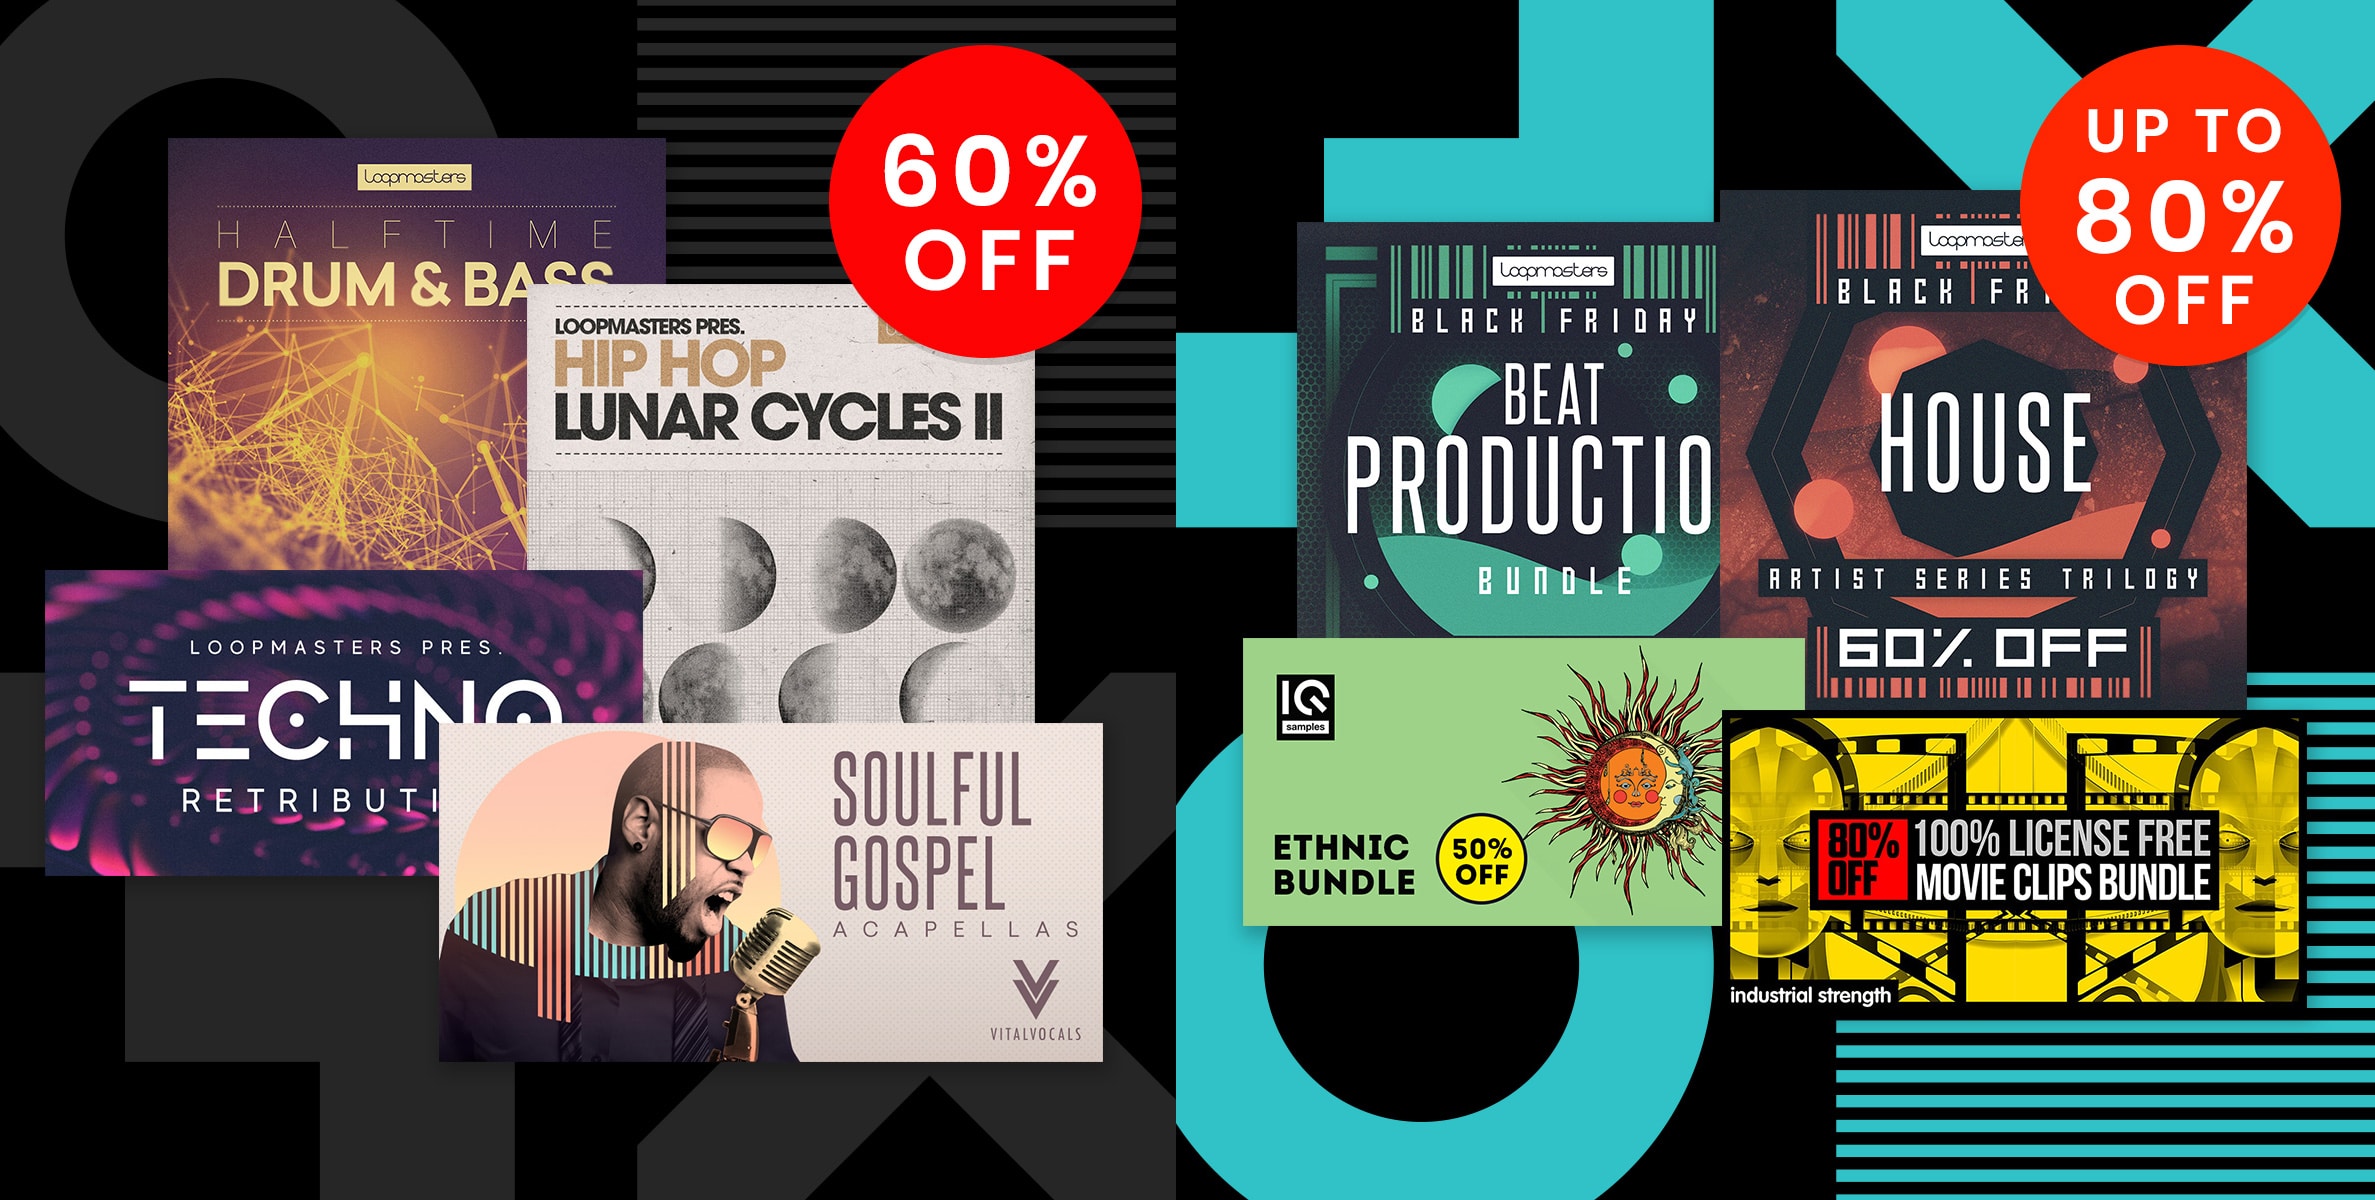 Loopmasters Black Friday Sales - Save up to 80% Off!